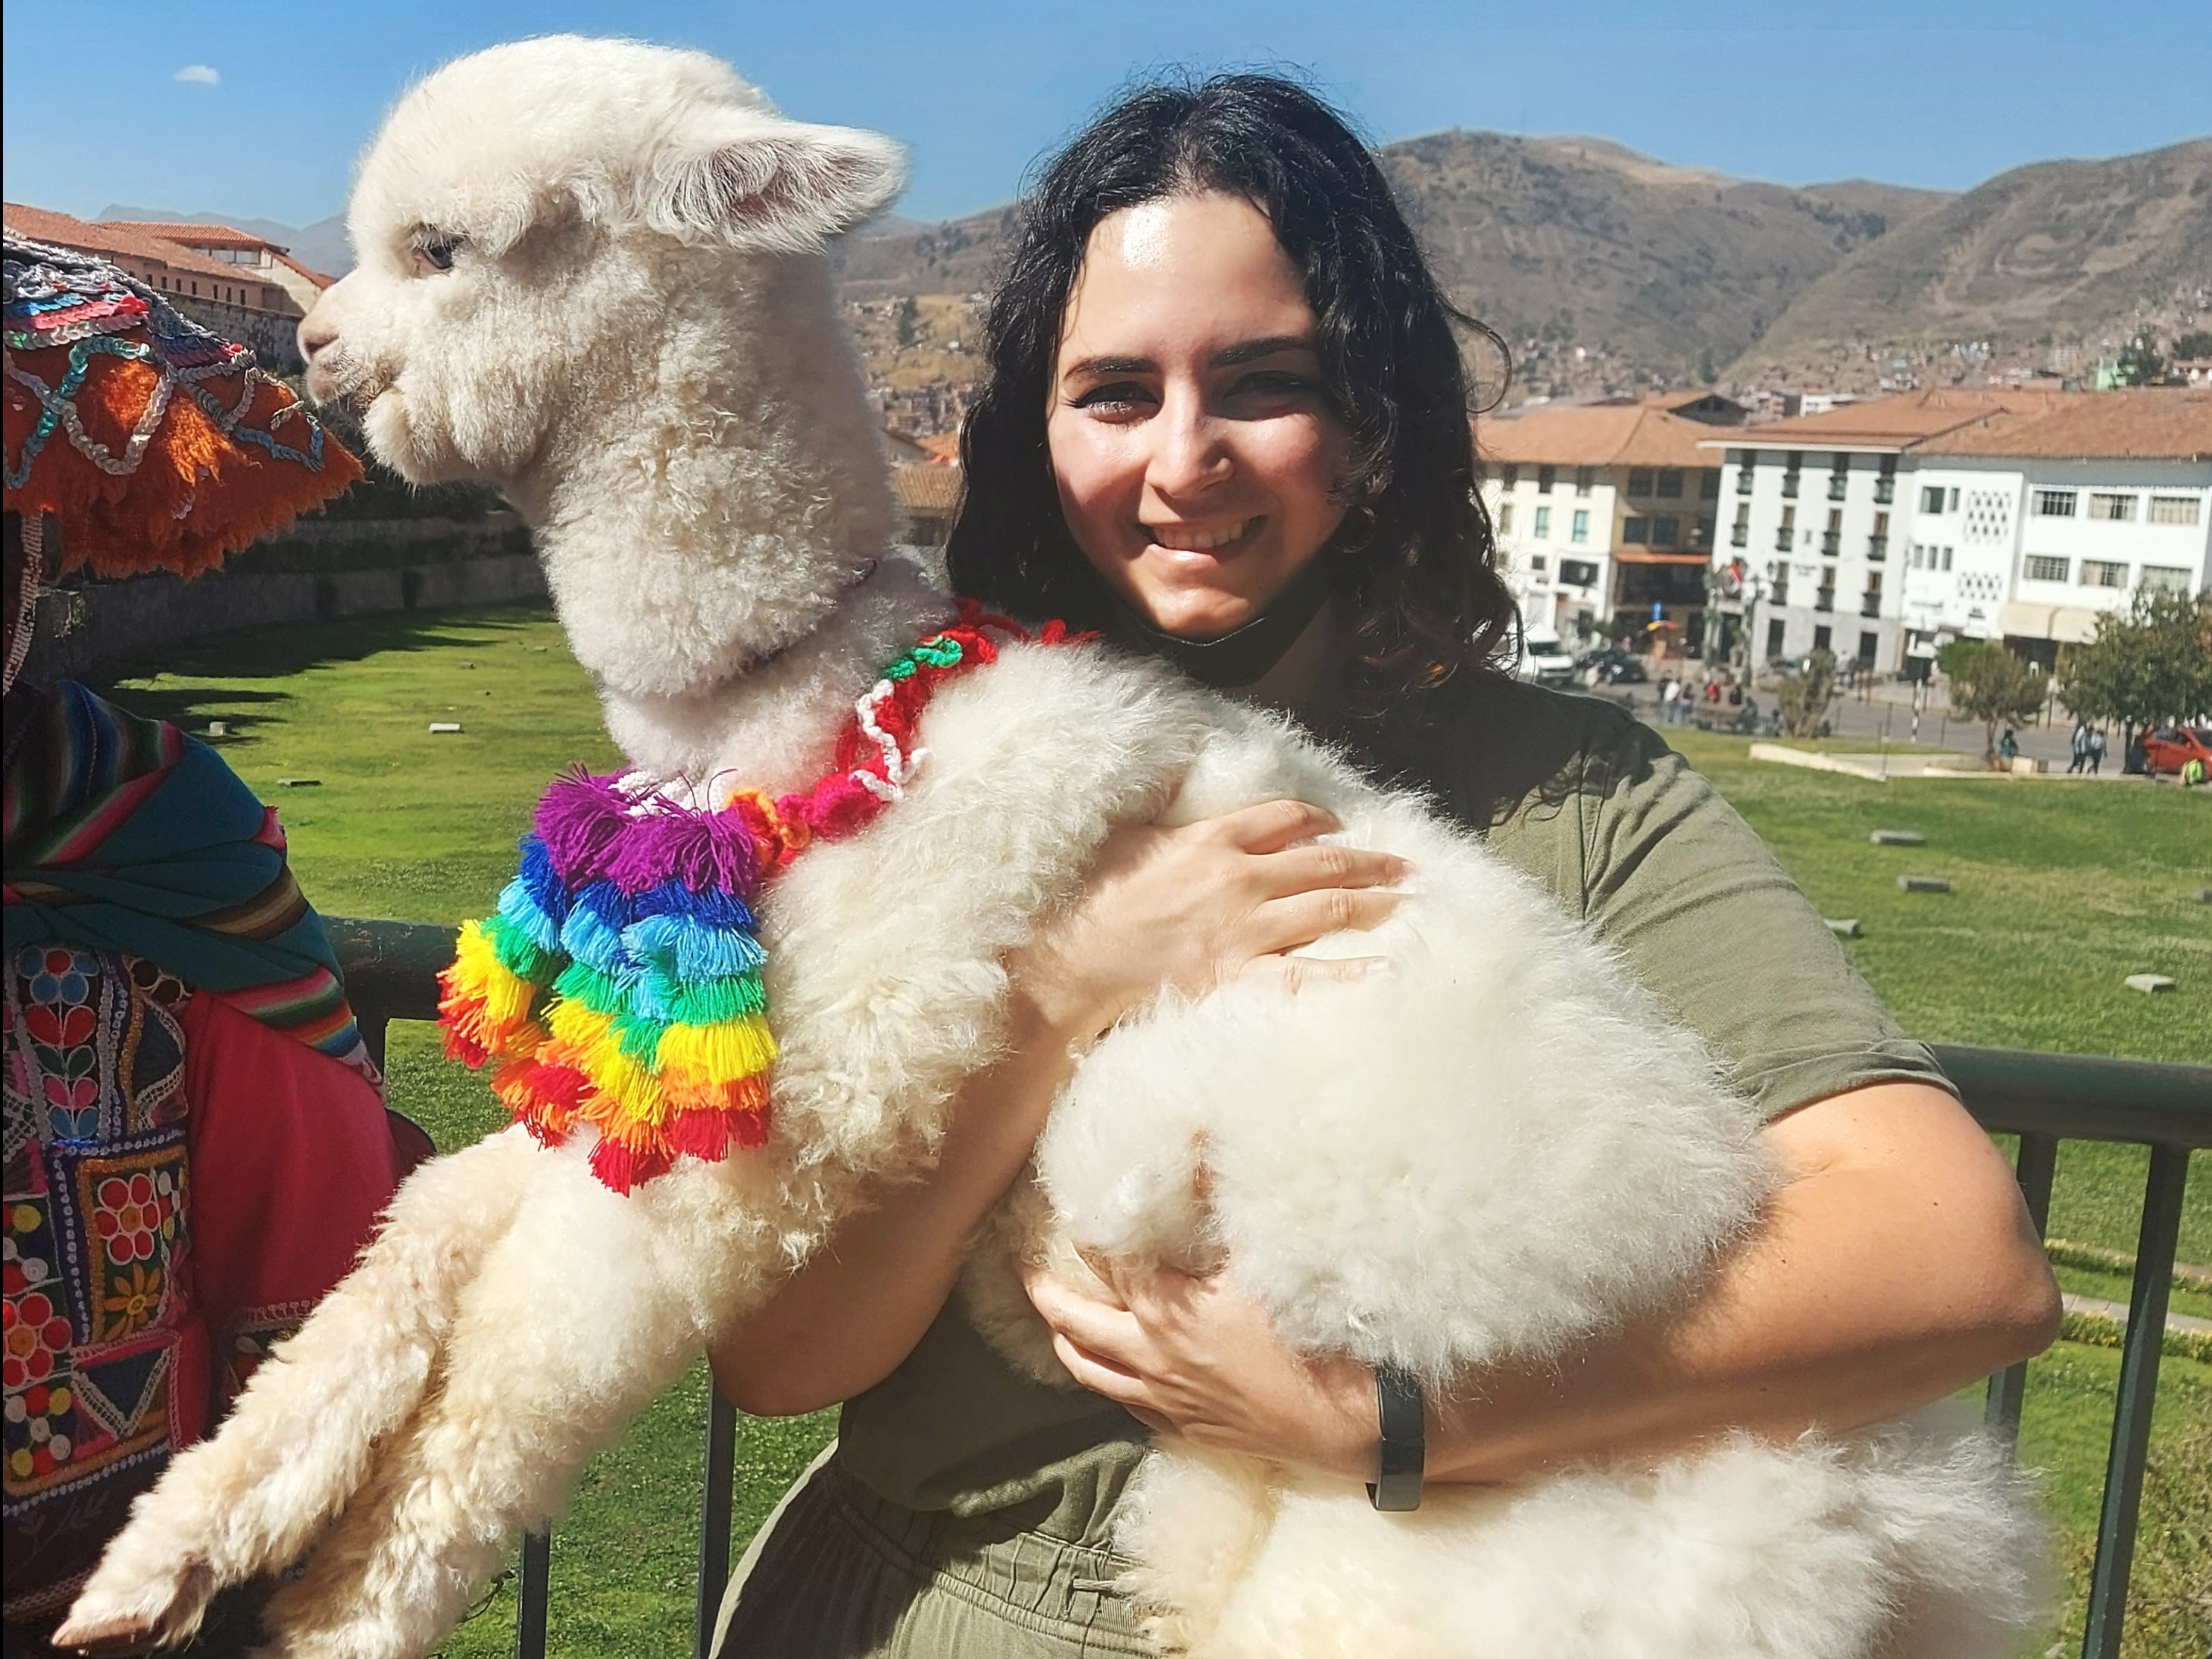 Mara's Peruvian experience during the Summer 2022 Faculty-led Program Abroad